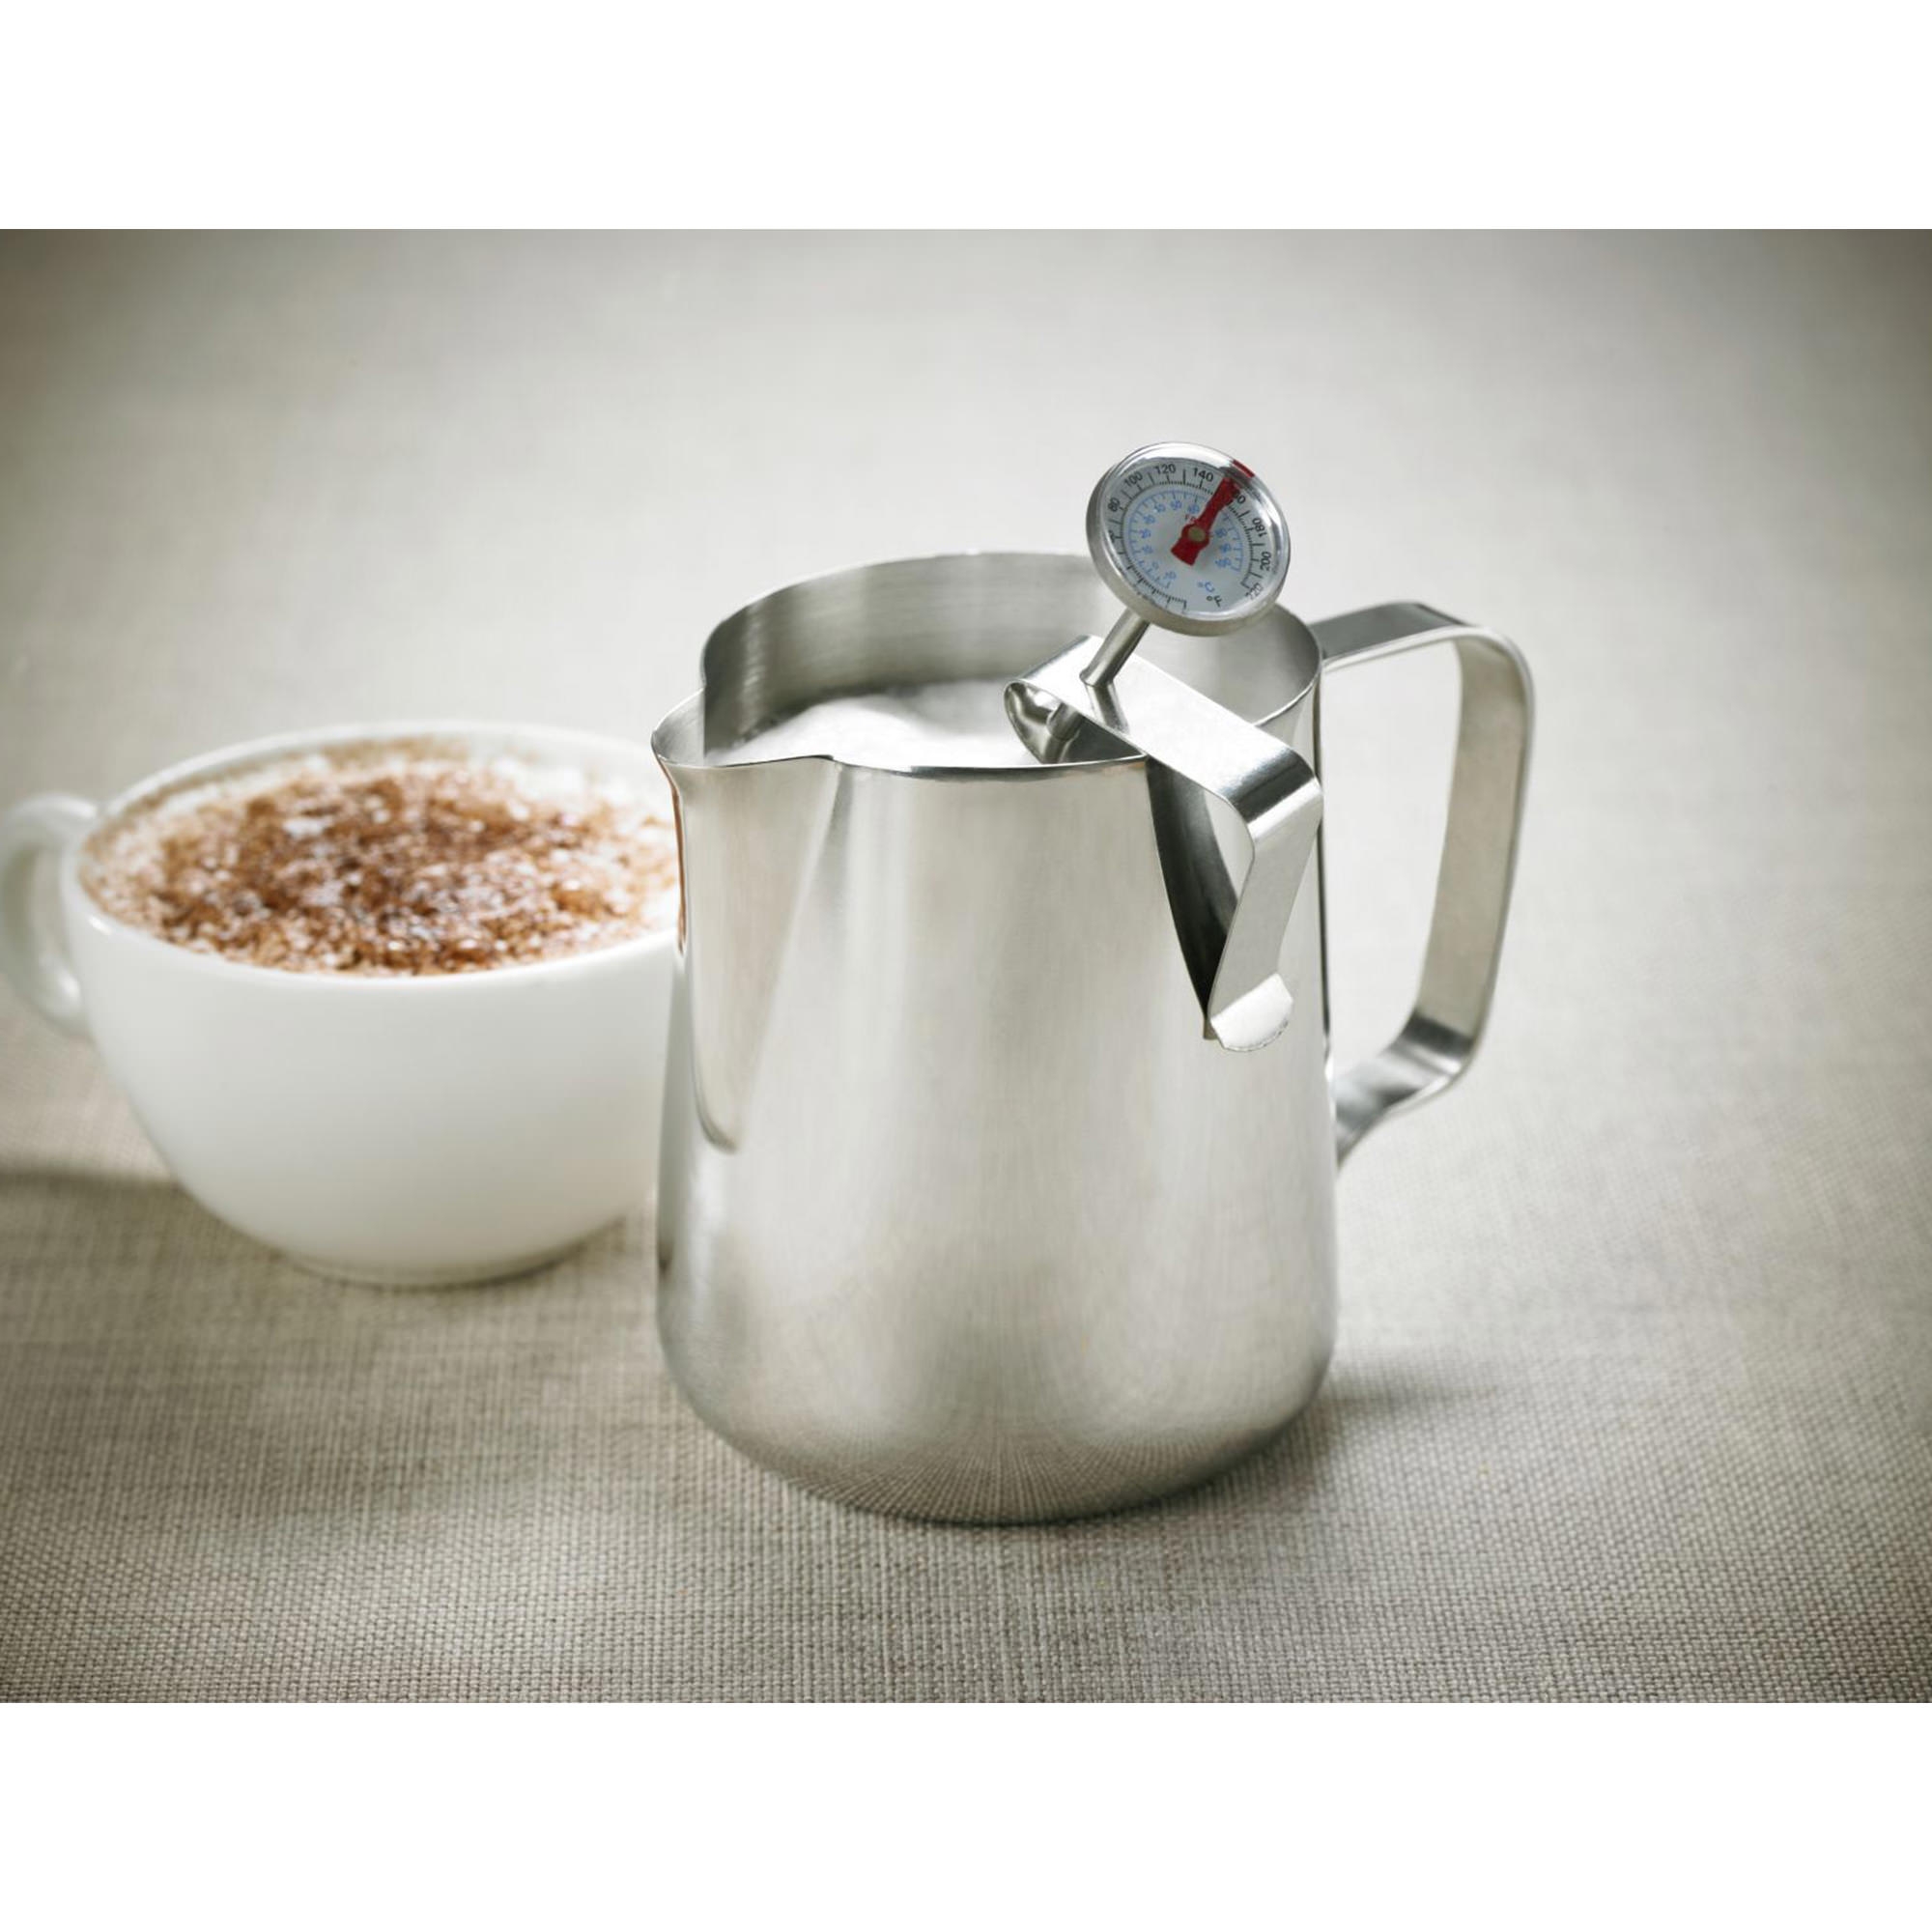 Leaf & Bean Milk Frothing Jug & Thermometer 600ml Image 2